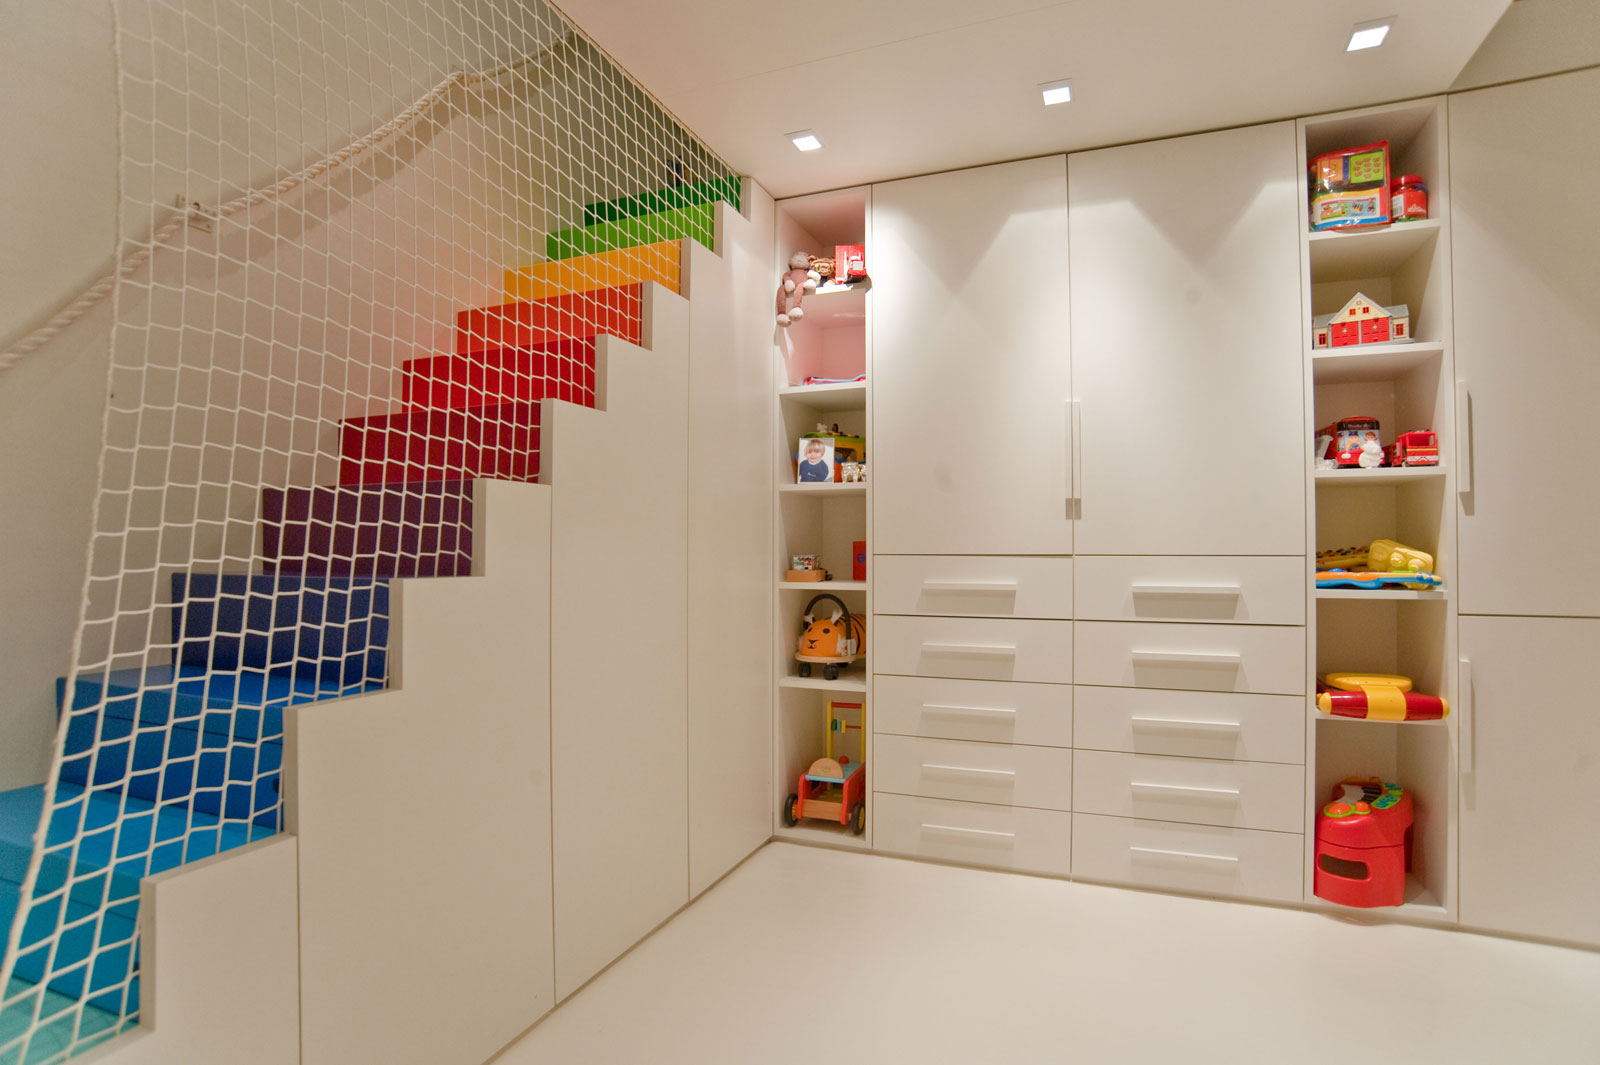 Little Venice Room Playful Little Venice House Kids Room Designed In White Interior Decorated With Rainbow Stair And Displayed Accessories In Open Shelving Interior Design  Traditional Interior Furniture Arranged In A Modern Design 